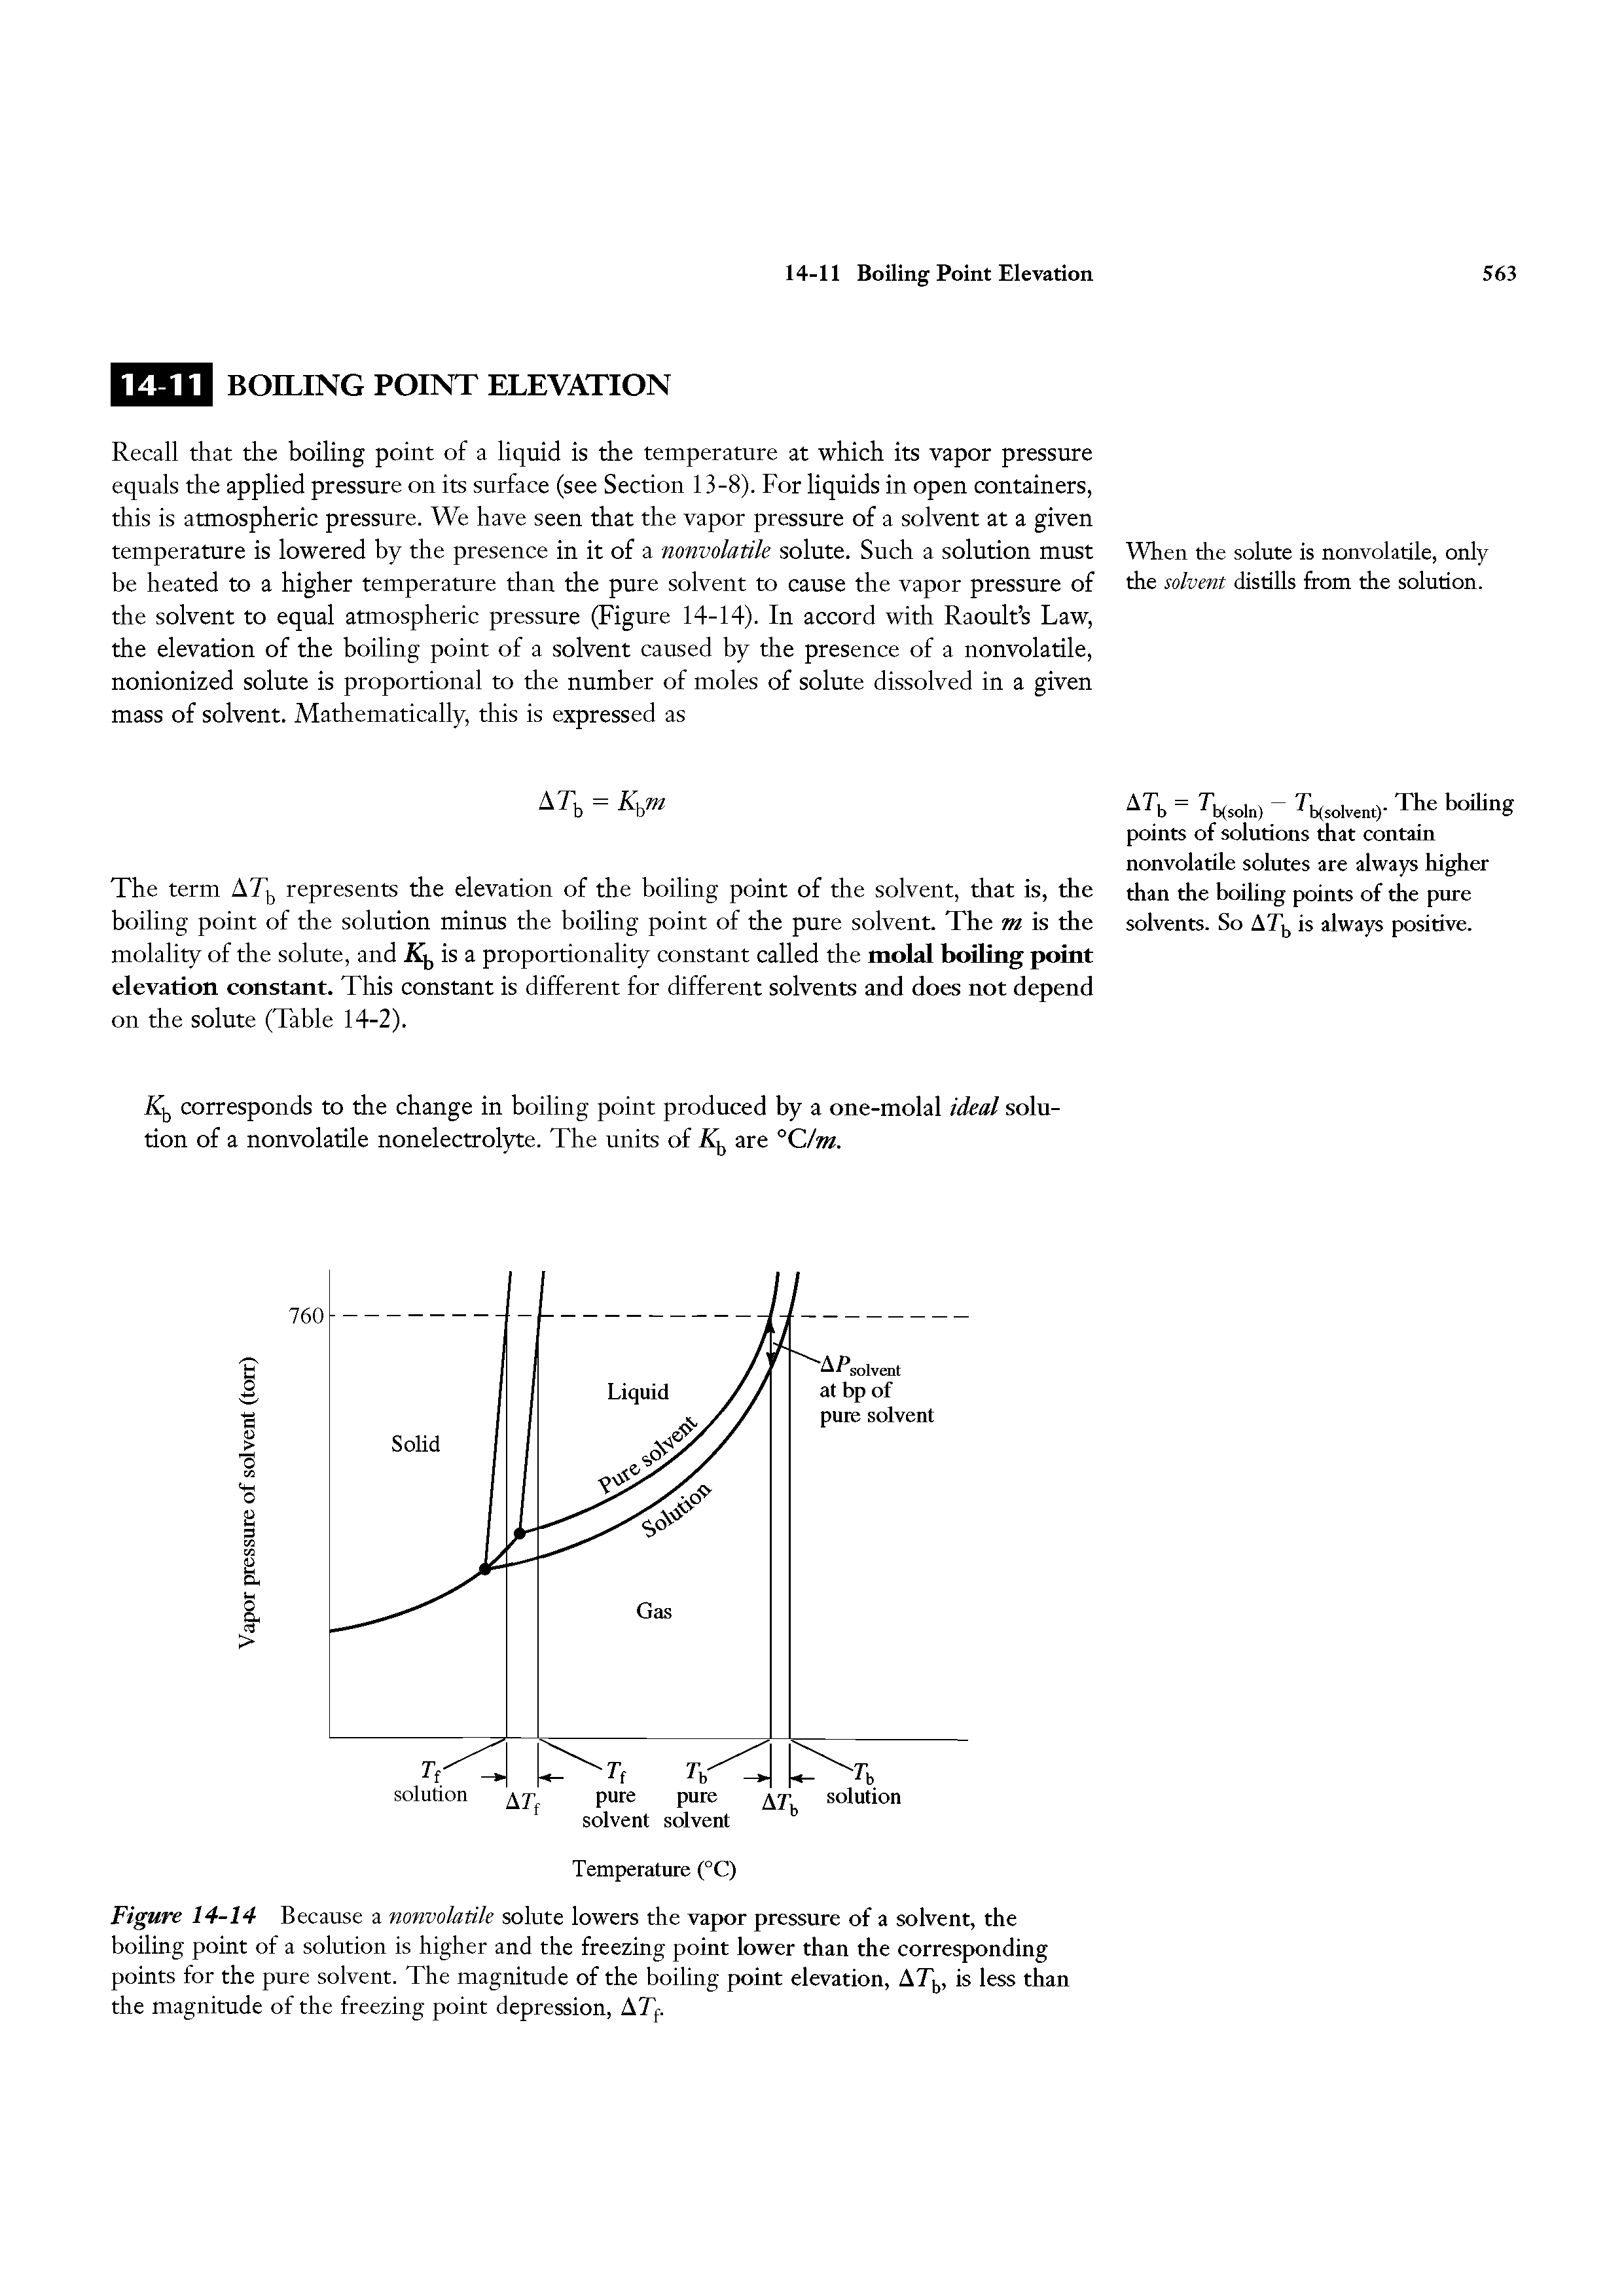 Figure 14-14 Because a nonvolatile solute lowers the vapor pressure of a solvent, the boiling point of a solution is higher and the freezing point lower than the corresponding points for the pure solvent. The magnitude of the boiling point elevation, ATj, is less than the magnitude of the freezing point depression, ATf.